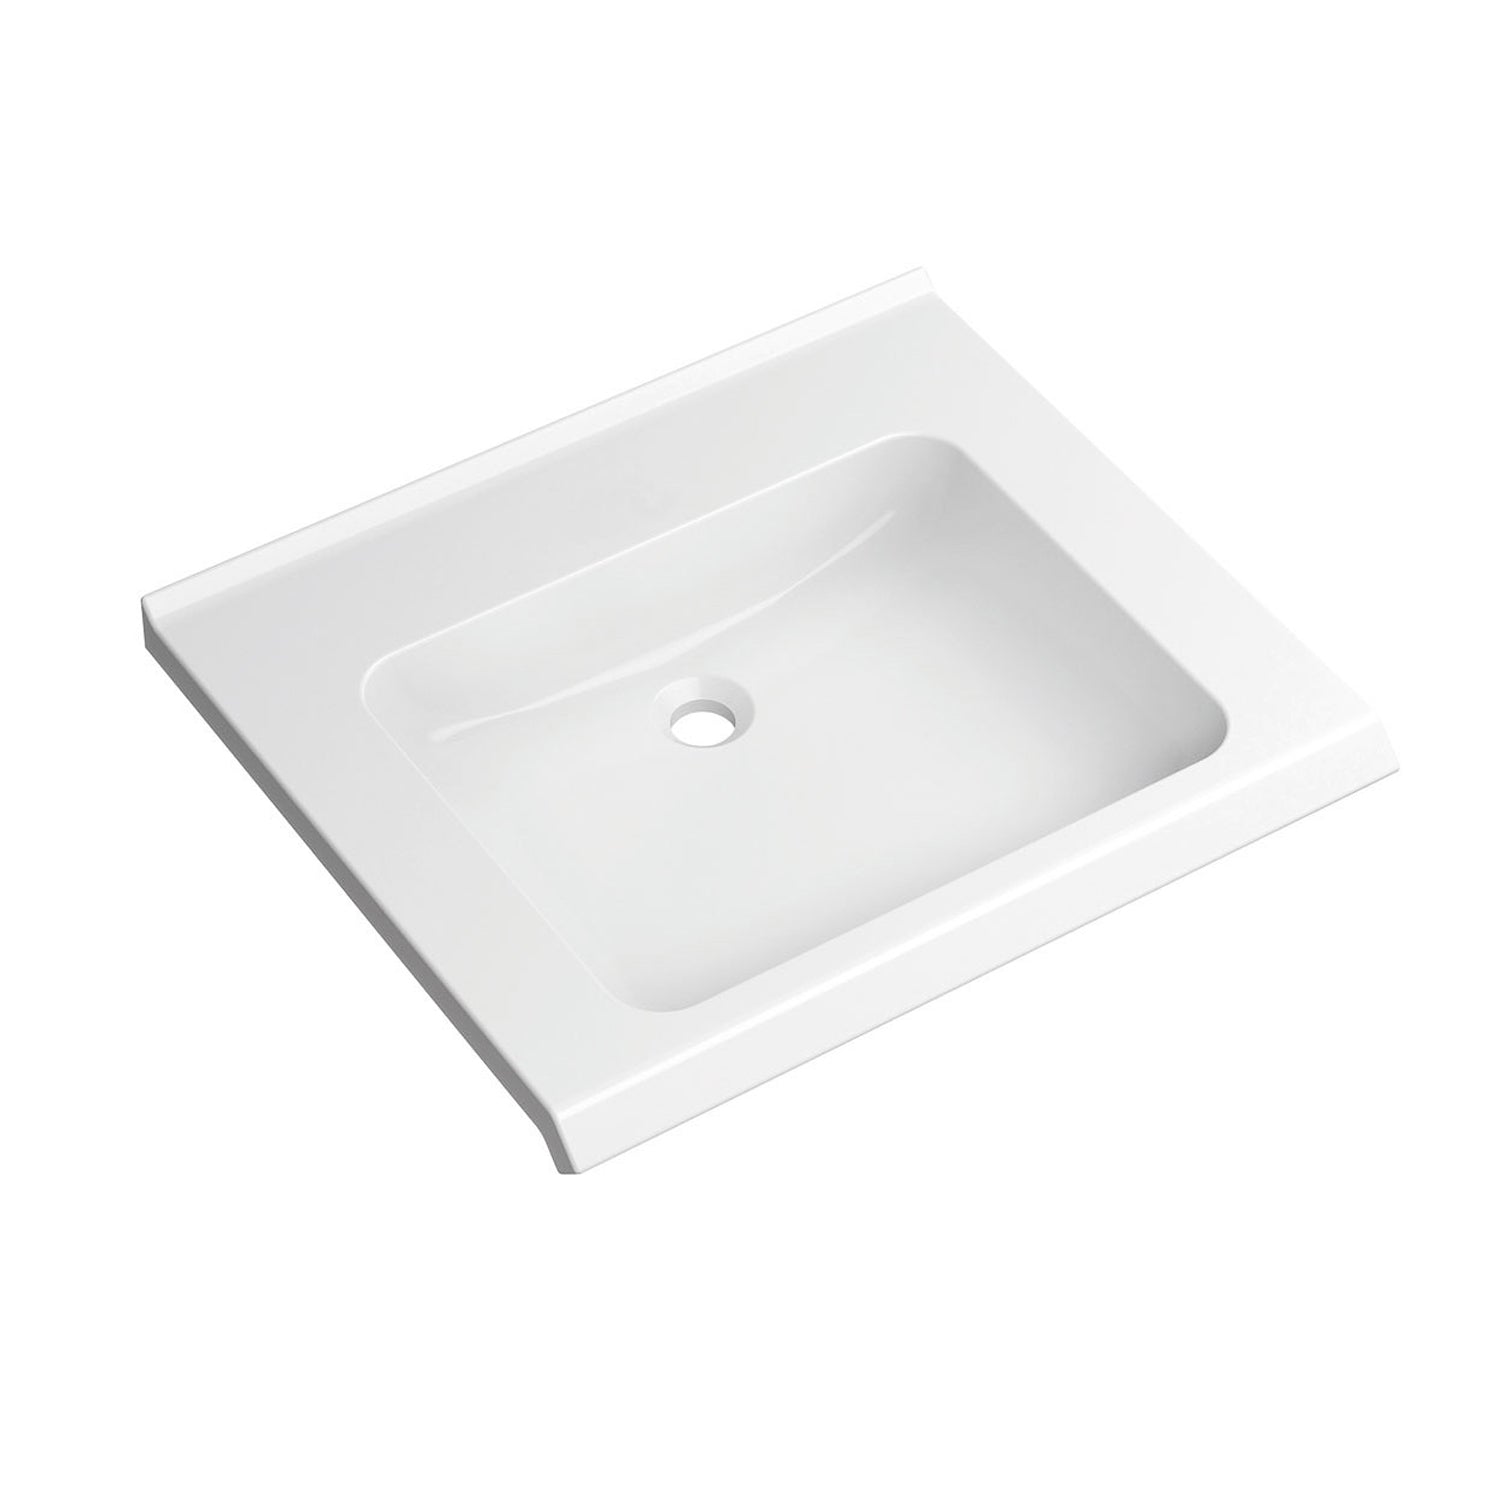 650mm SurfaceHold Wall Hung Basin with no tap hole on a white background